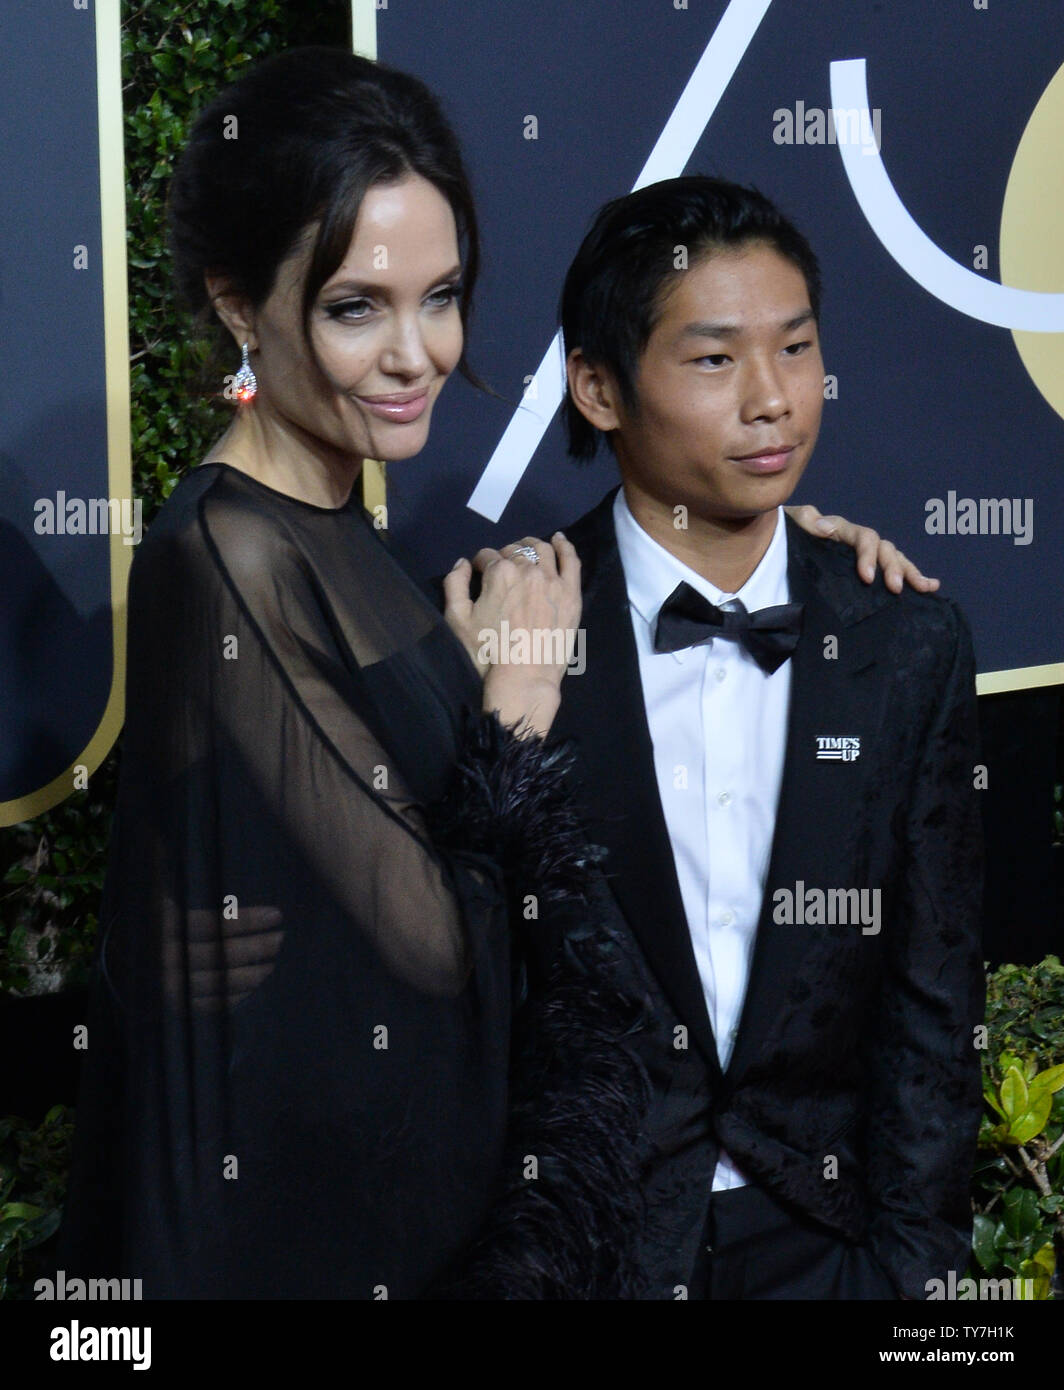 Actor Angelina Jolie (L) and Pax Thien Jolie-Pitt attend the 75th annual Golden Globe Awards at the Beverly Hilton Hotel in Beverly Hills, California on January 7, 2018. Photo by Jim Ruymen/UPI Stock Photo